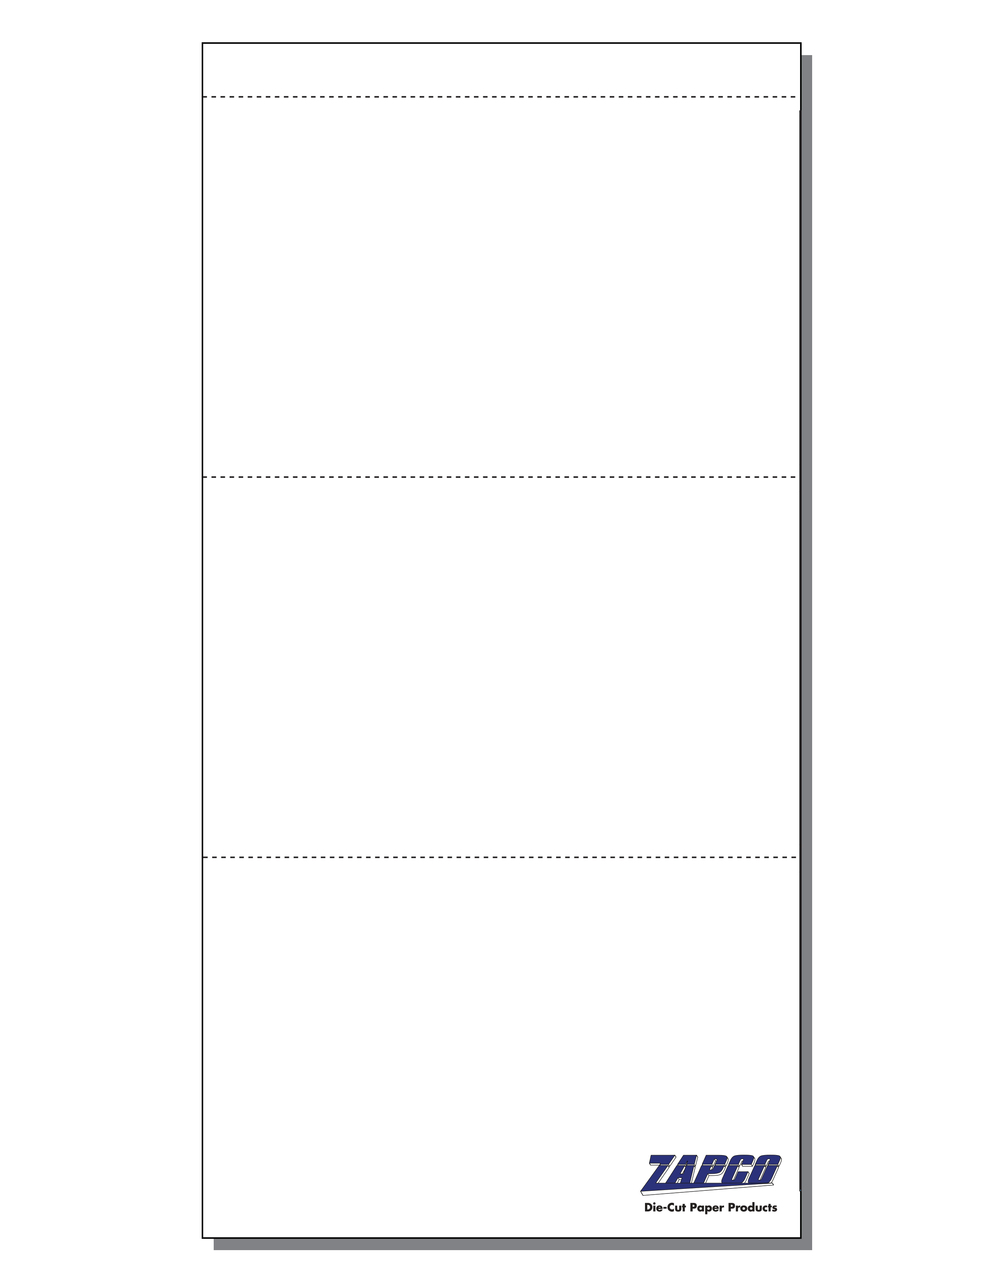 White 3-Up 3.5 x 5.5 Perforated Postcard and Index Card Stock (150 Cards)